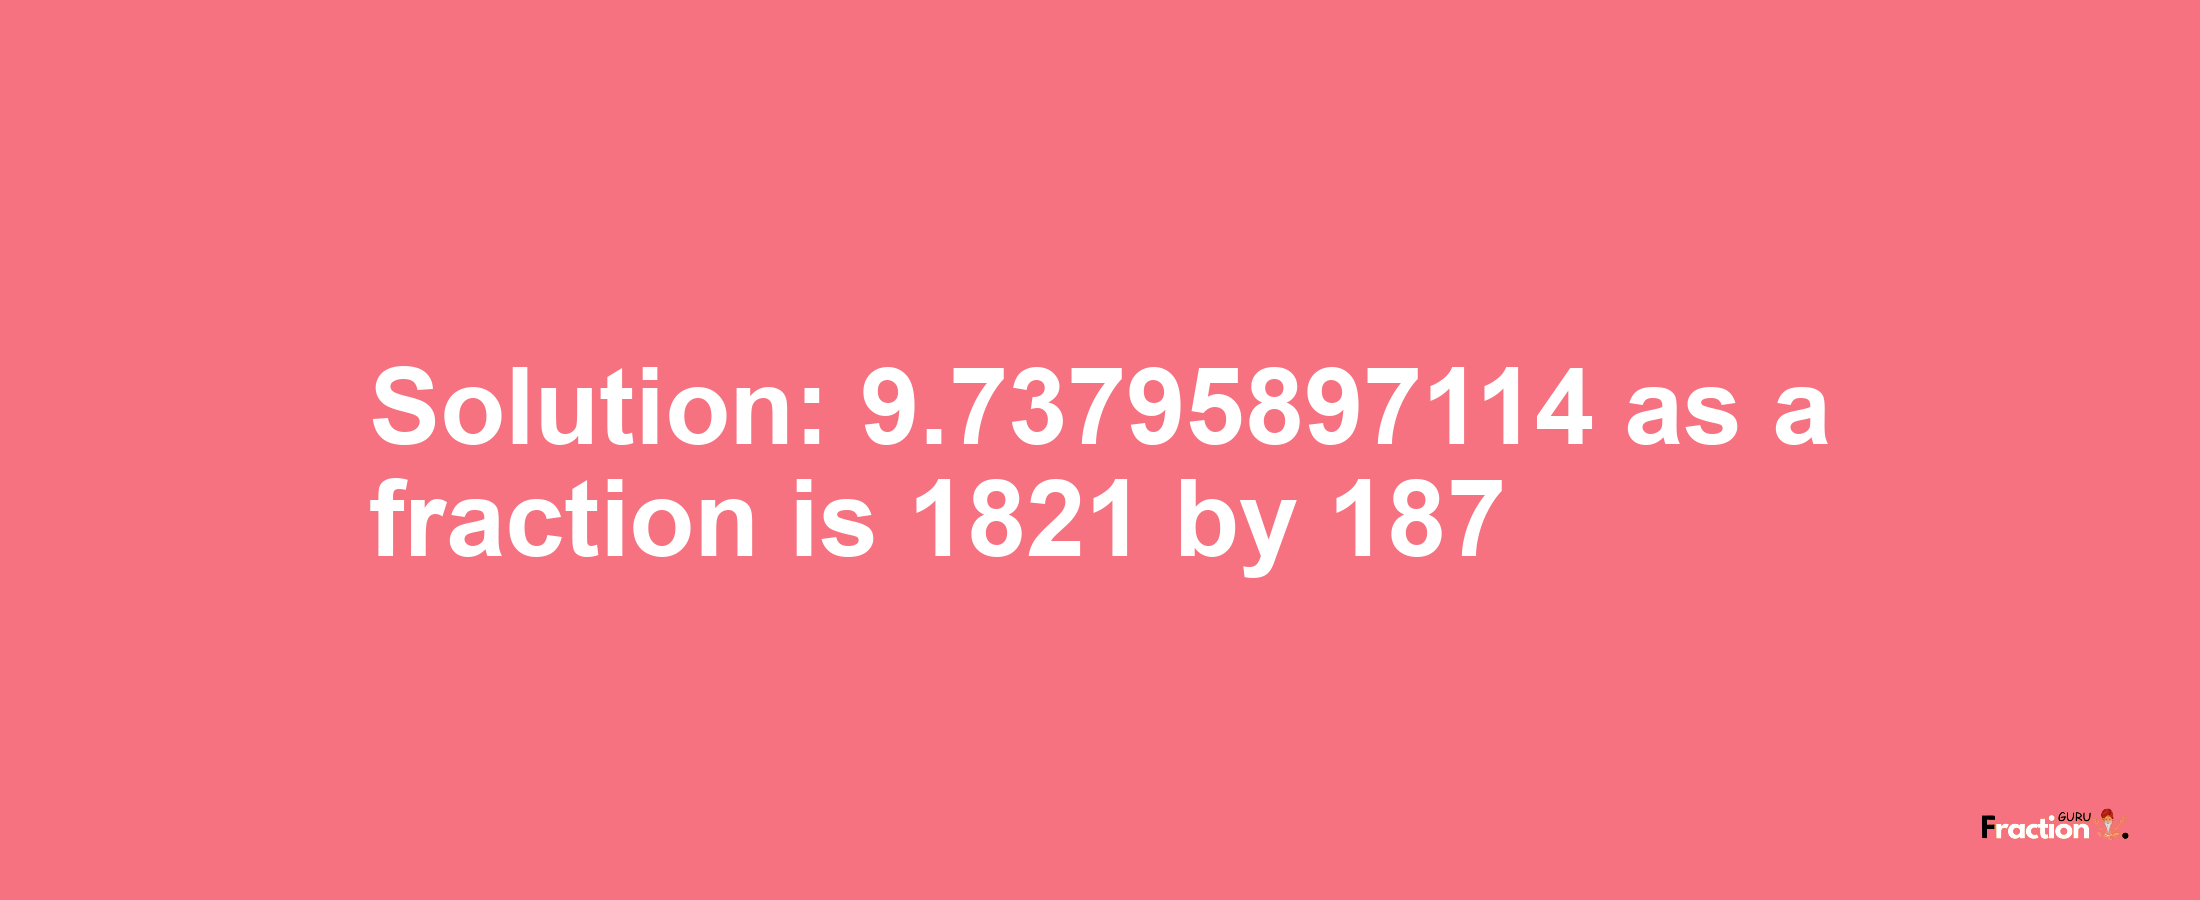 Solution:9.73795897114 as a fraction is 1821/187